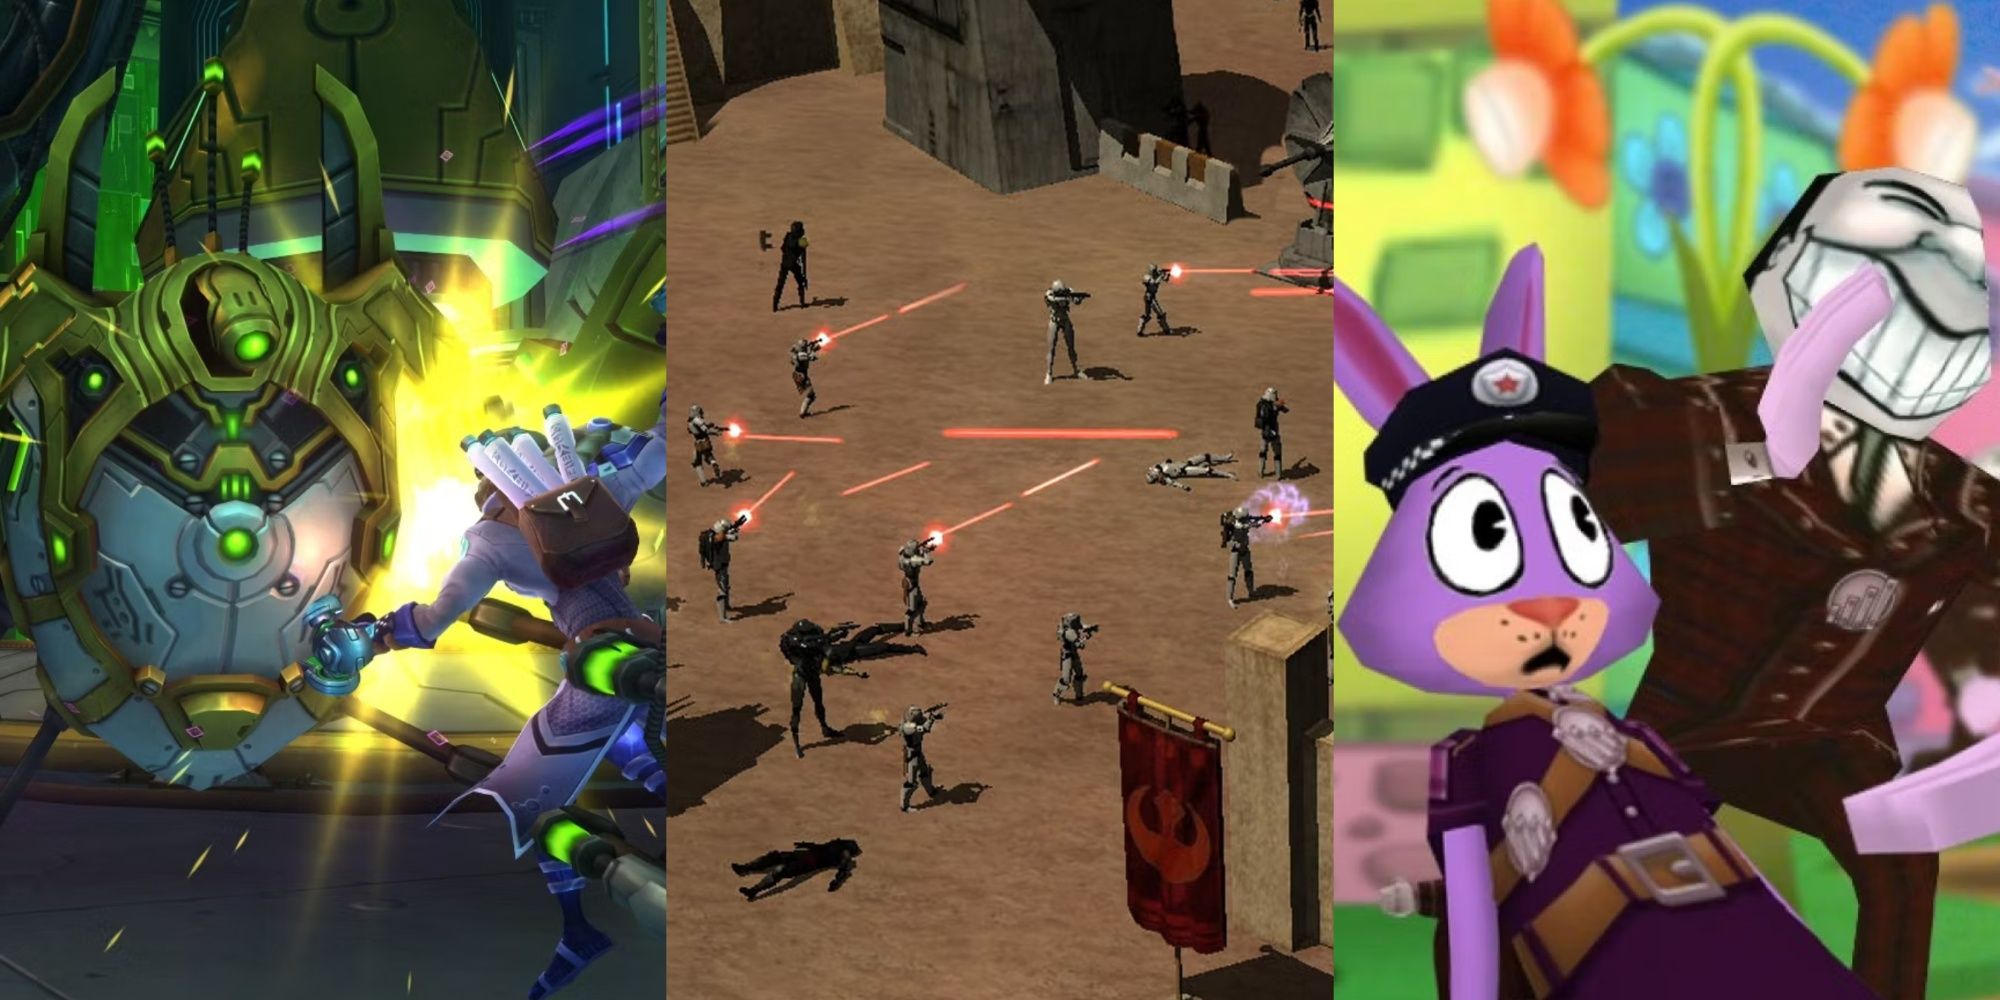 A collage showing gameplay of Wildstar Stalked, Star War Galaxies, and Toontown Rewritten.